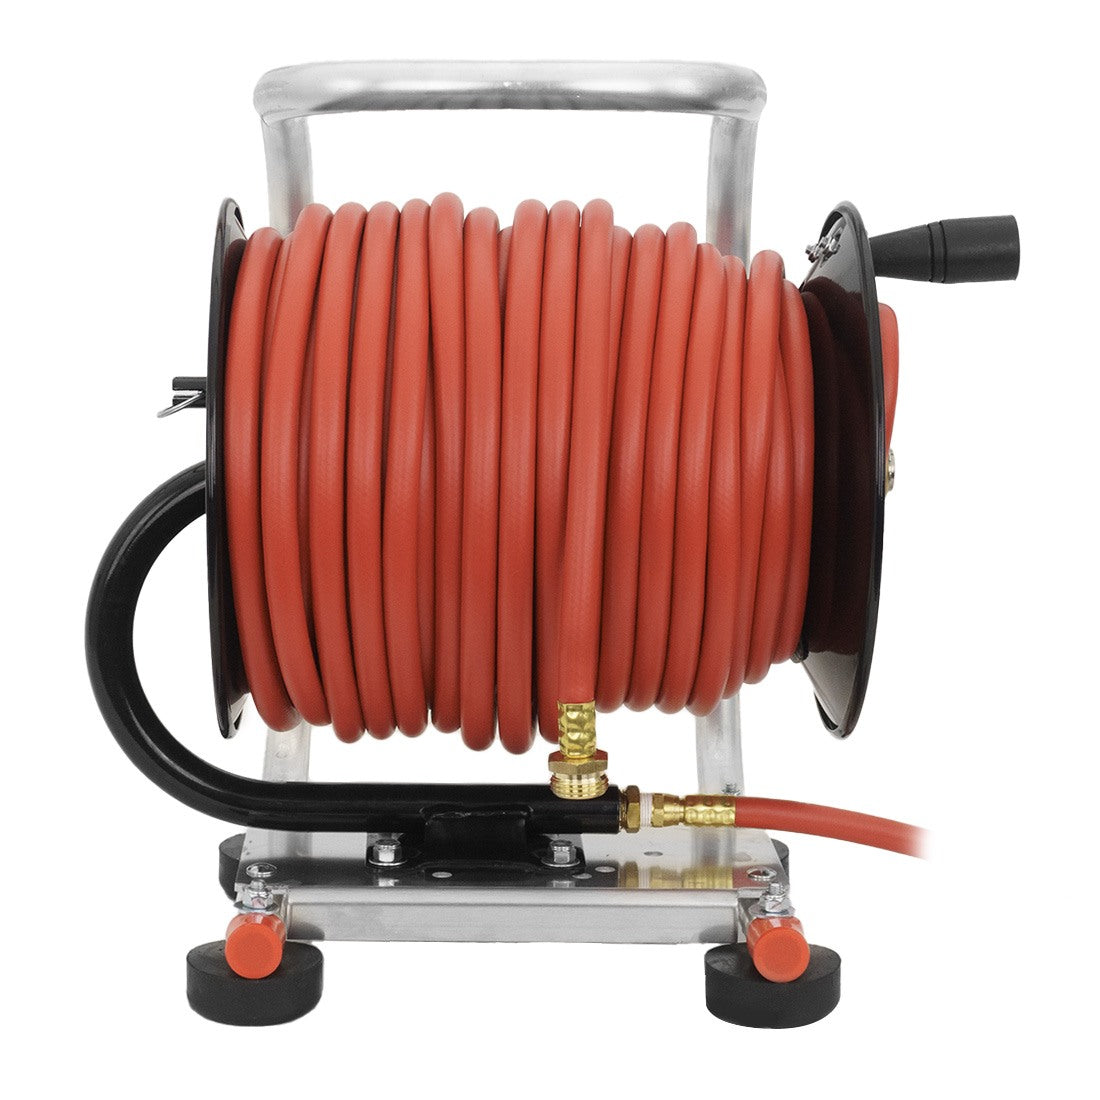 Pure Water Power Hose Reel Assembly 250 Ft, PWP-HR-250